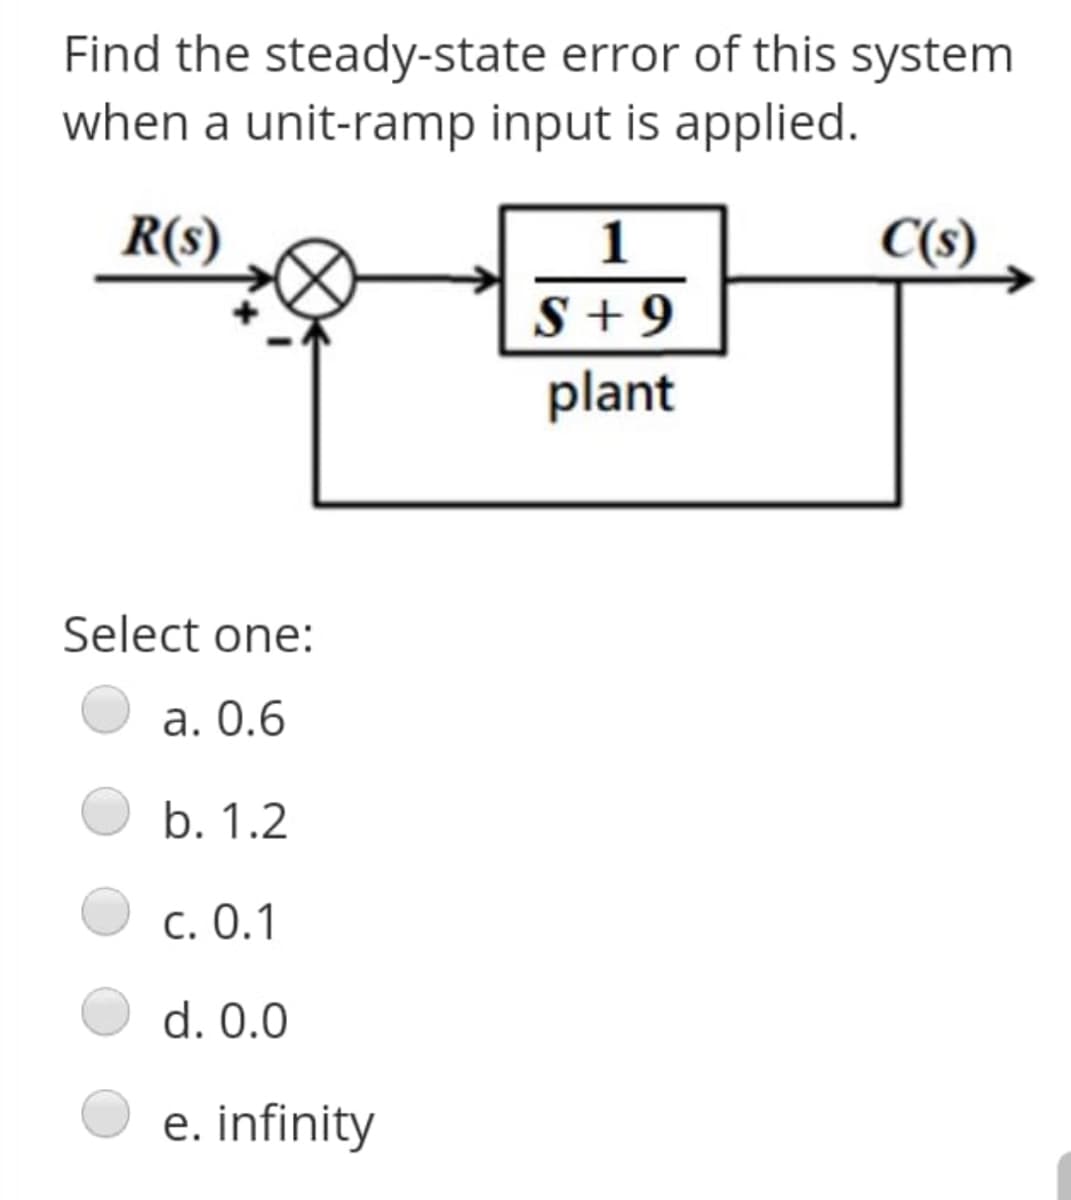 Find the steady-state error of this system
when a unit-ramp input is applied.
R(s)
1
C(s)
S + 9
plant
Select one:
а. О.6
b. 1.2
с. 0.1
d. 0.0
e. infinity
